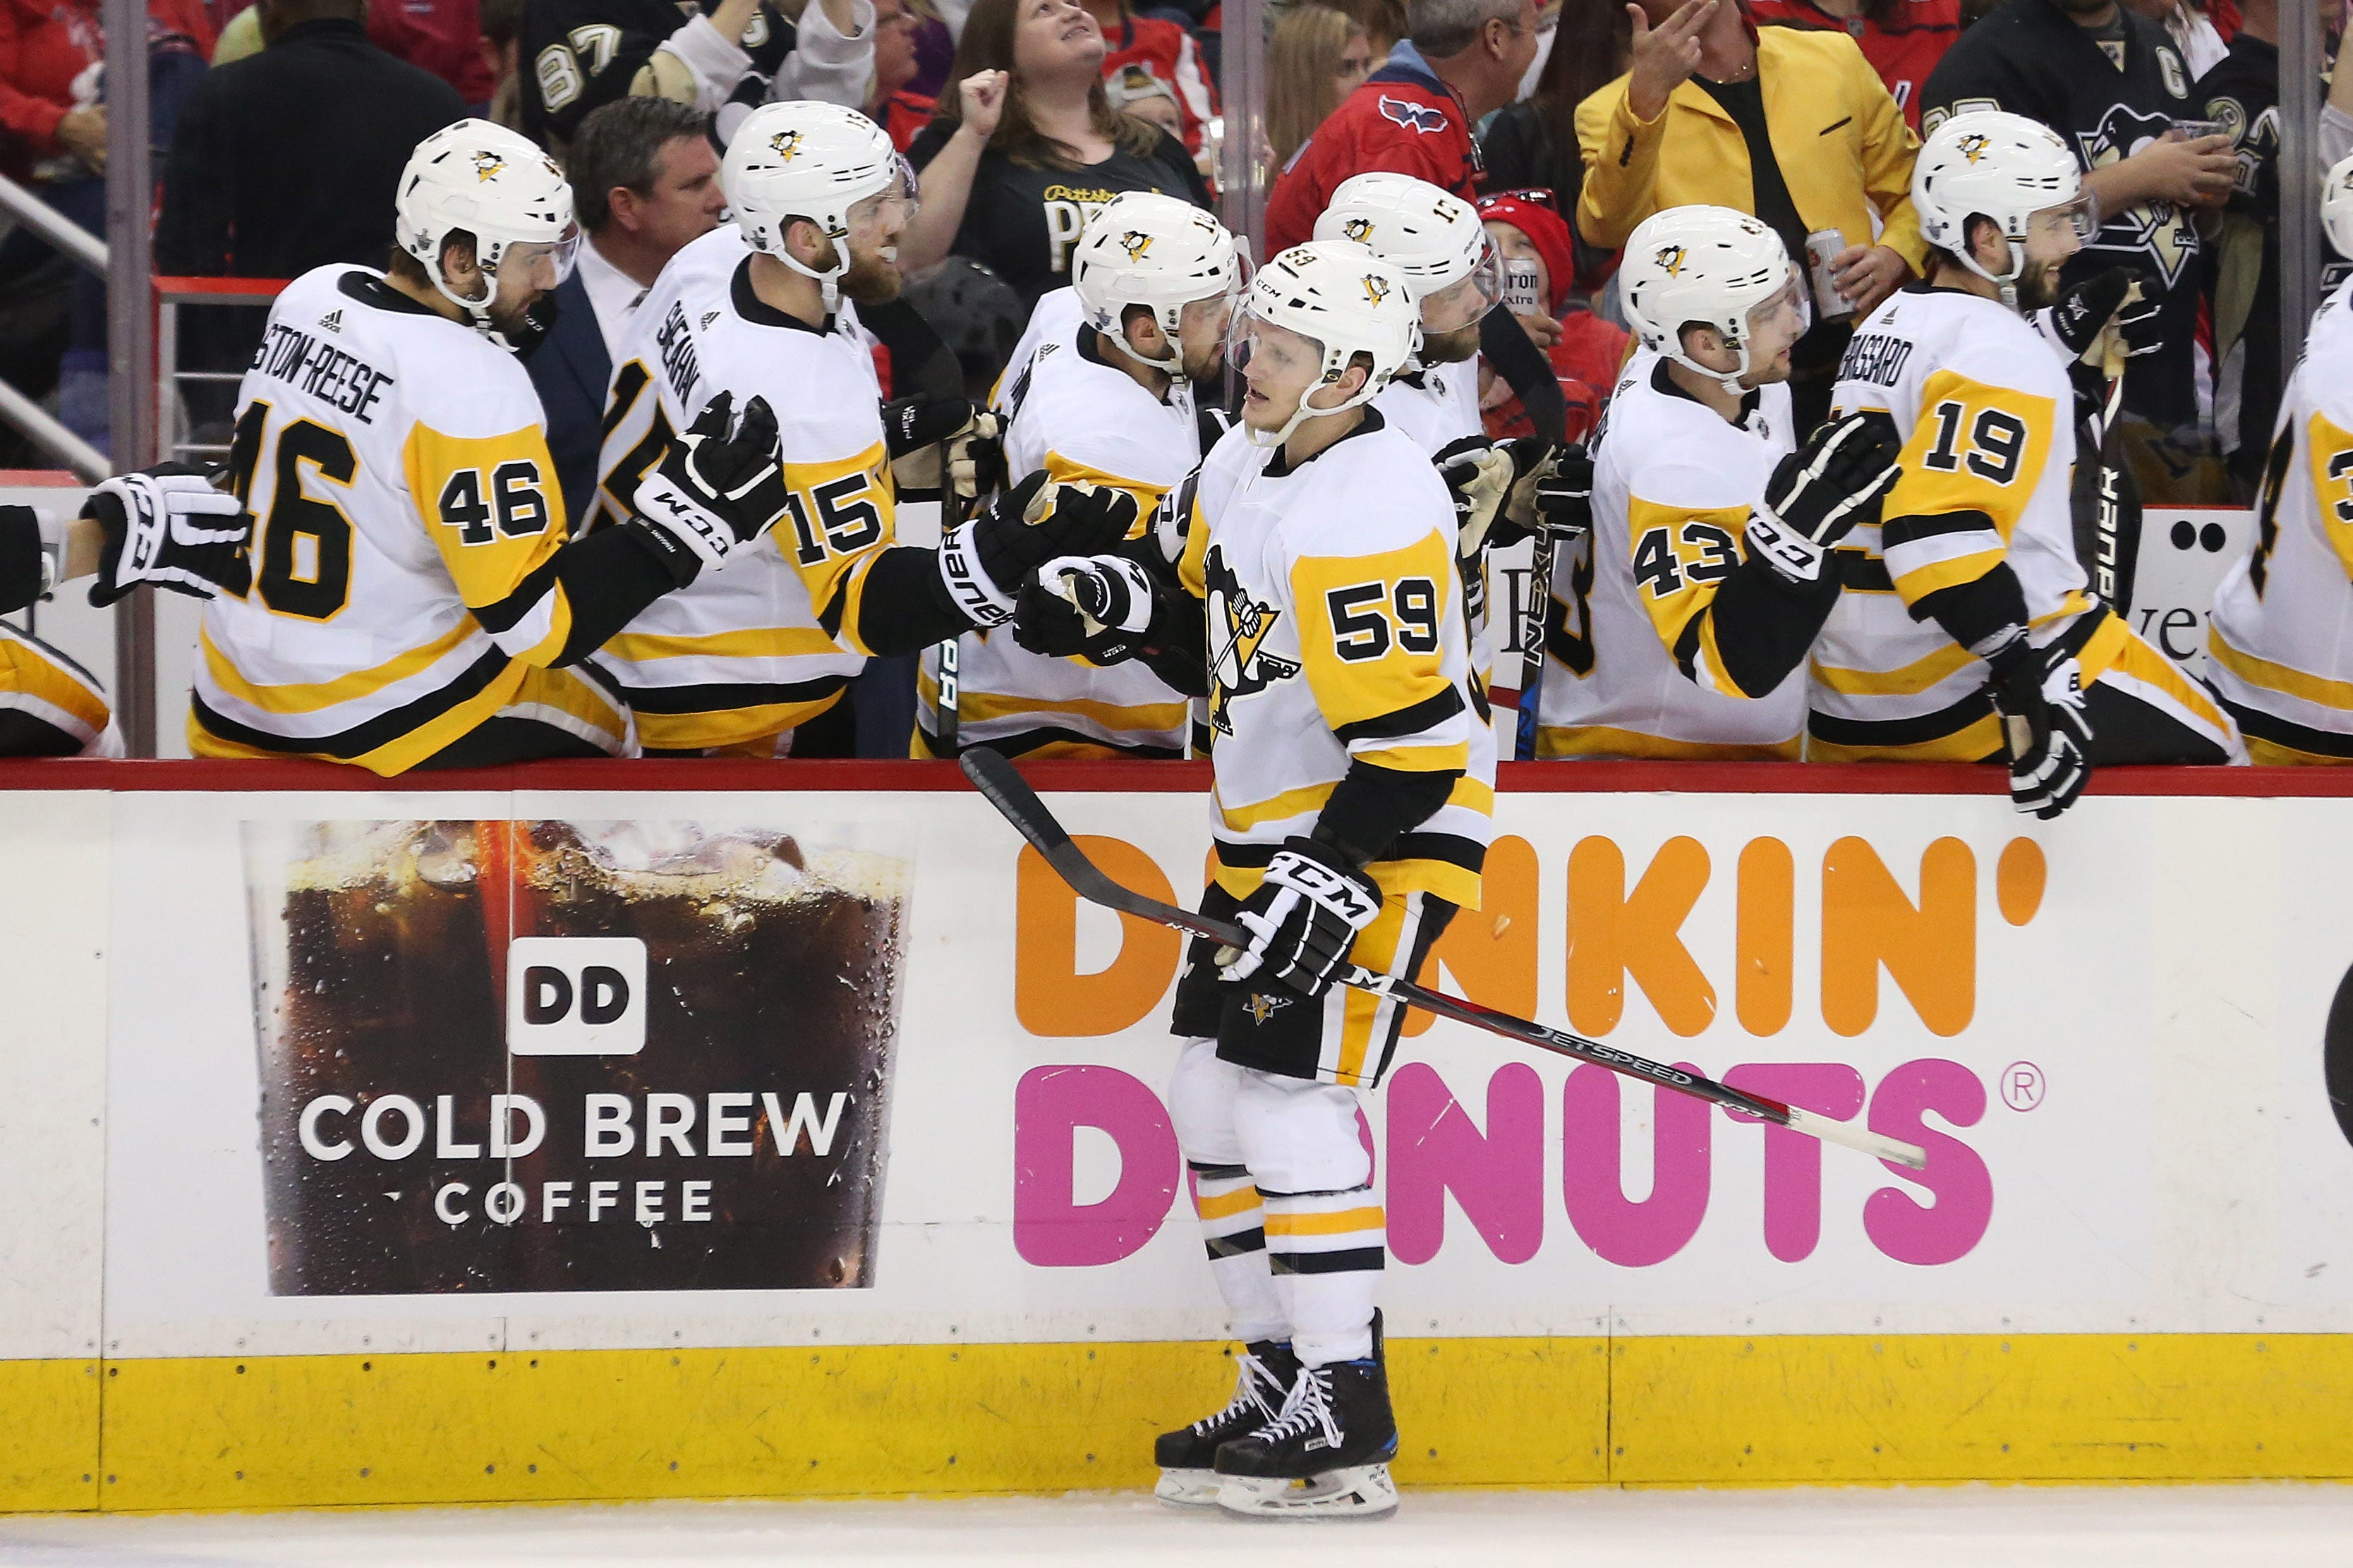 Capitals blow another 2-goal lead in Game 1 loss to Penguins